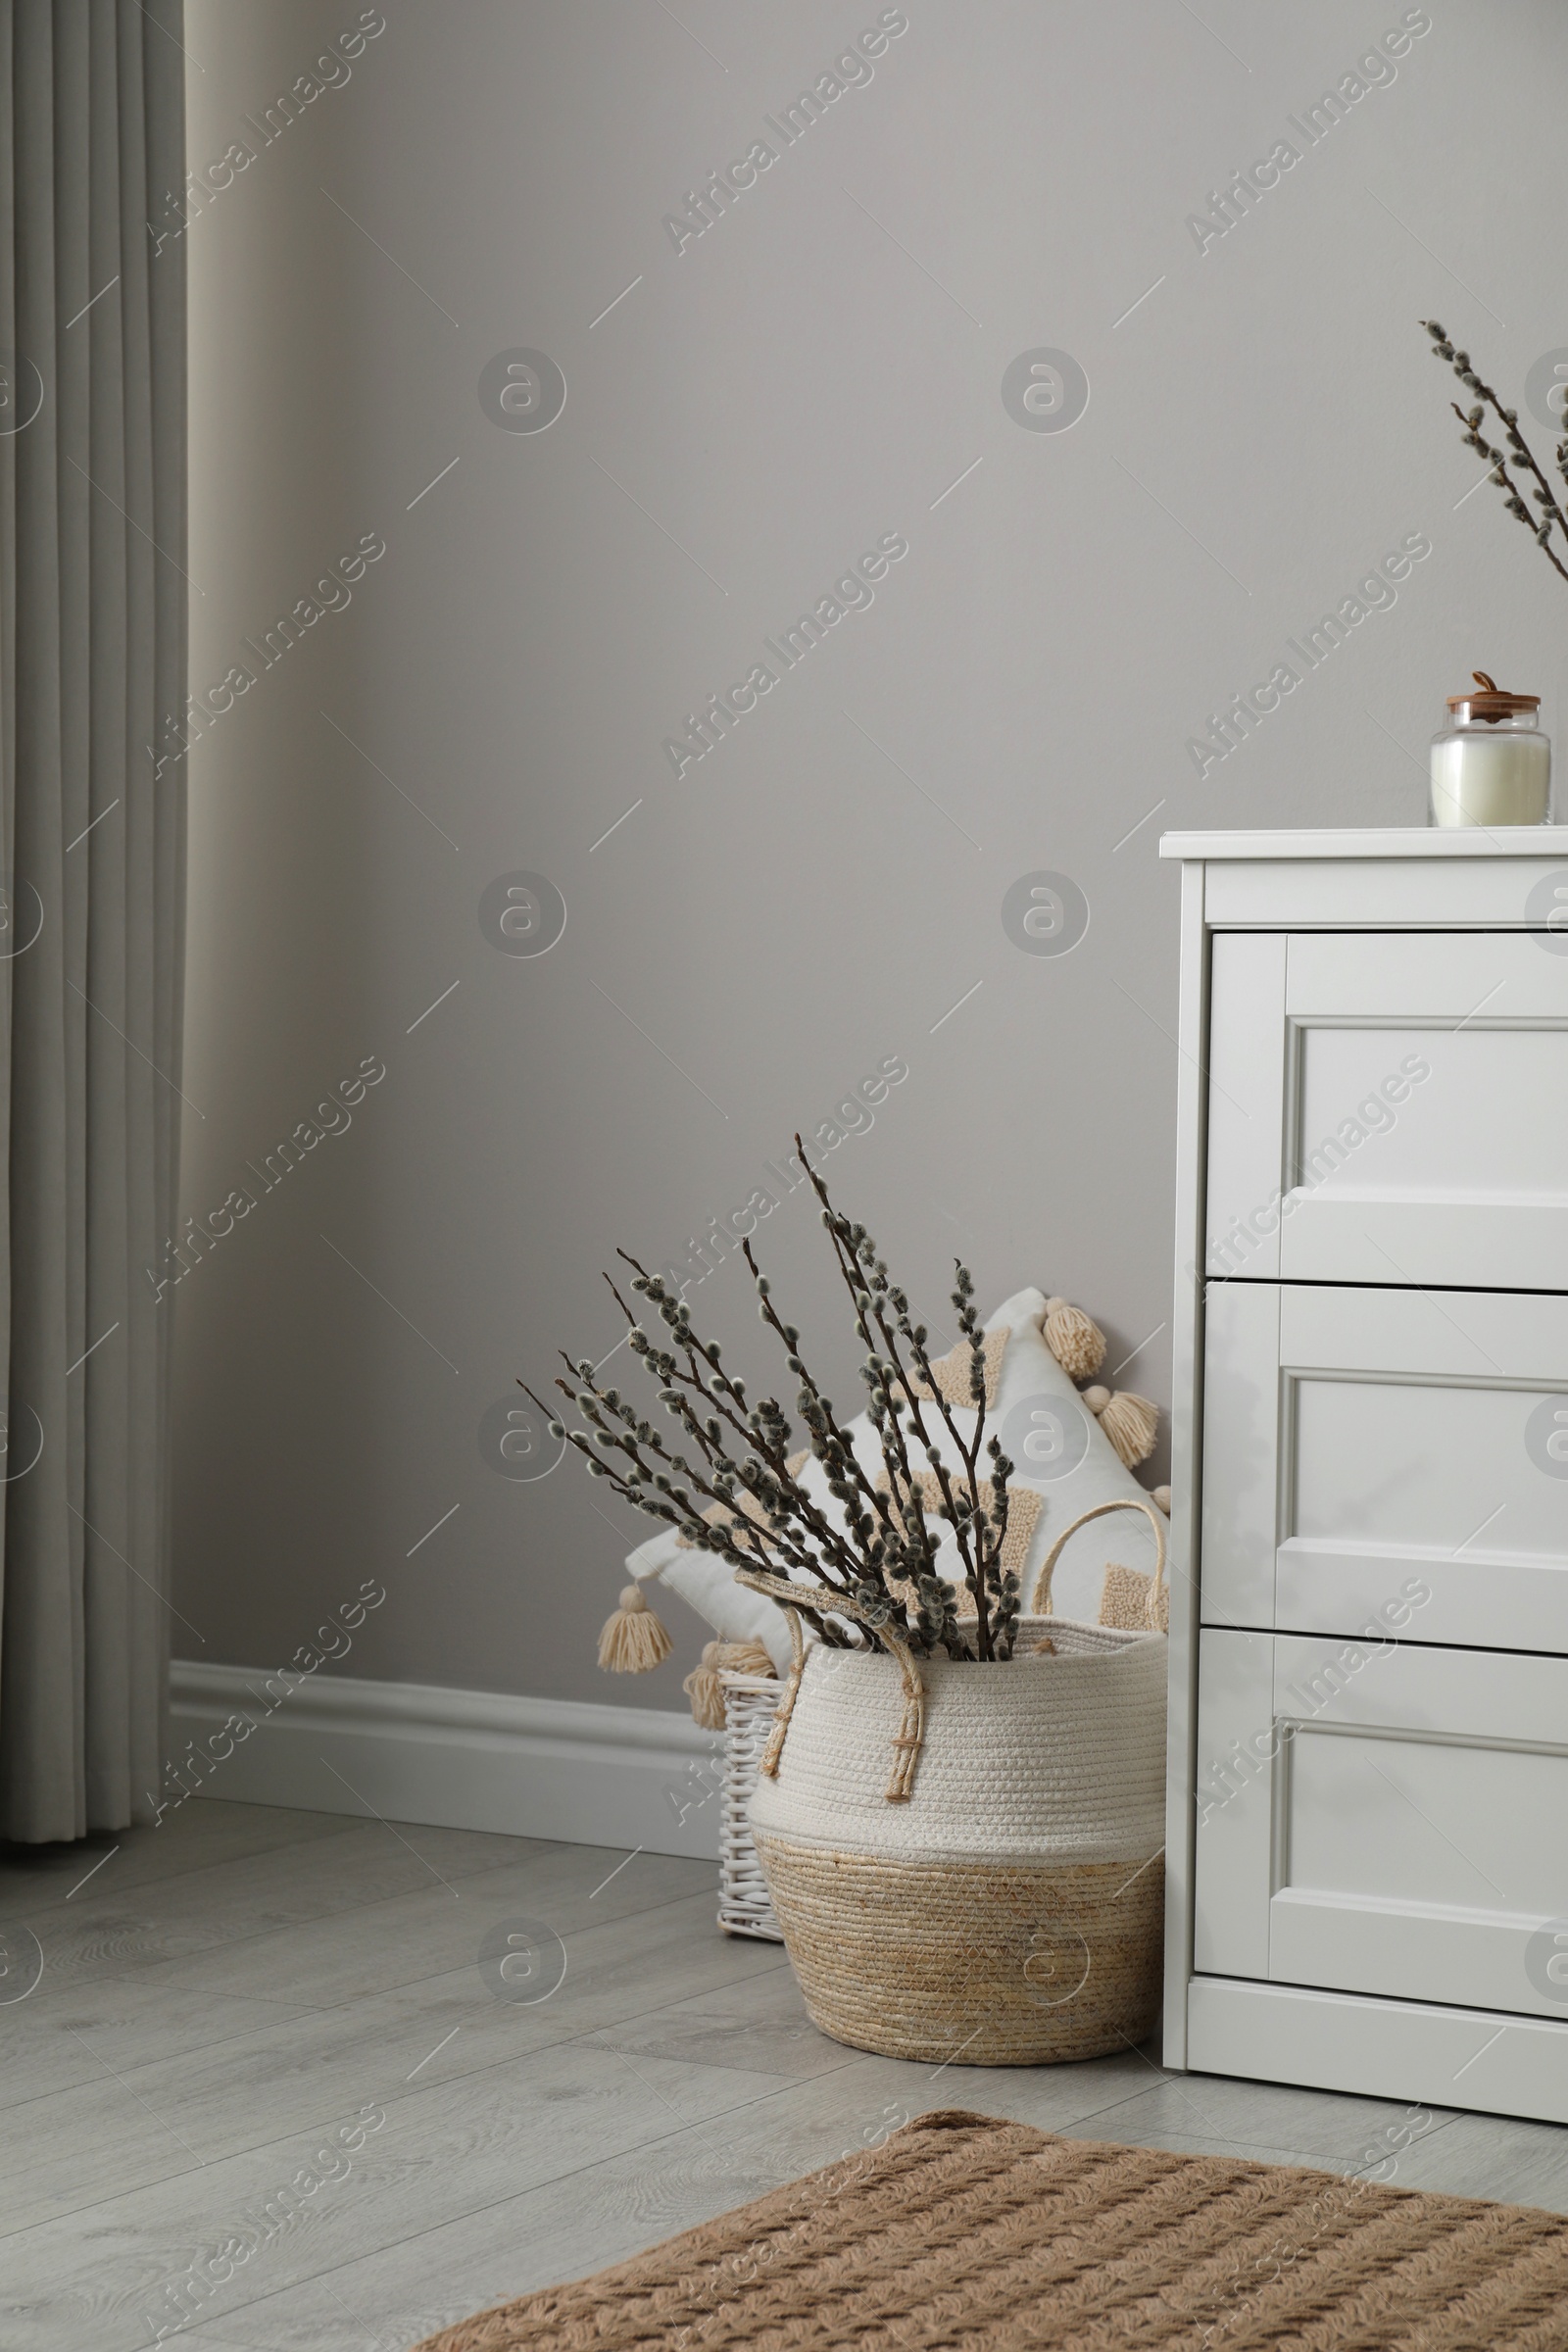 Photo of Basket with pussy willow branches near chest of drawers indoors